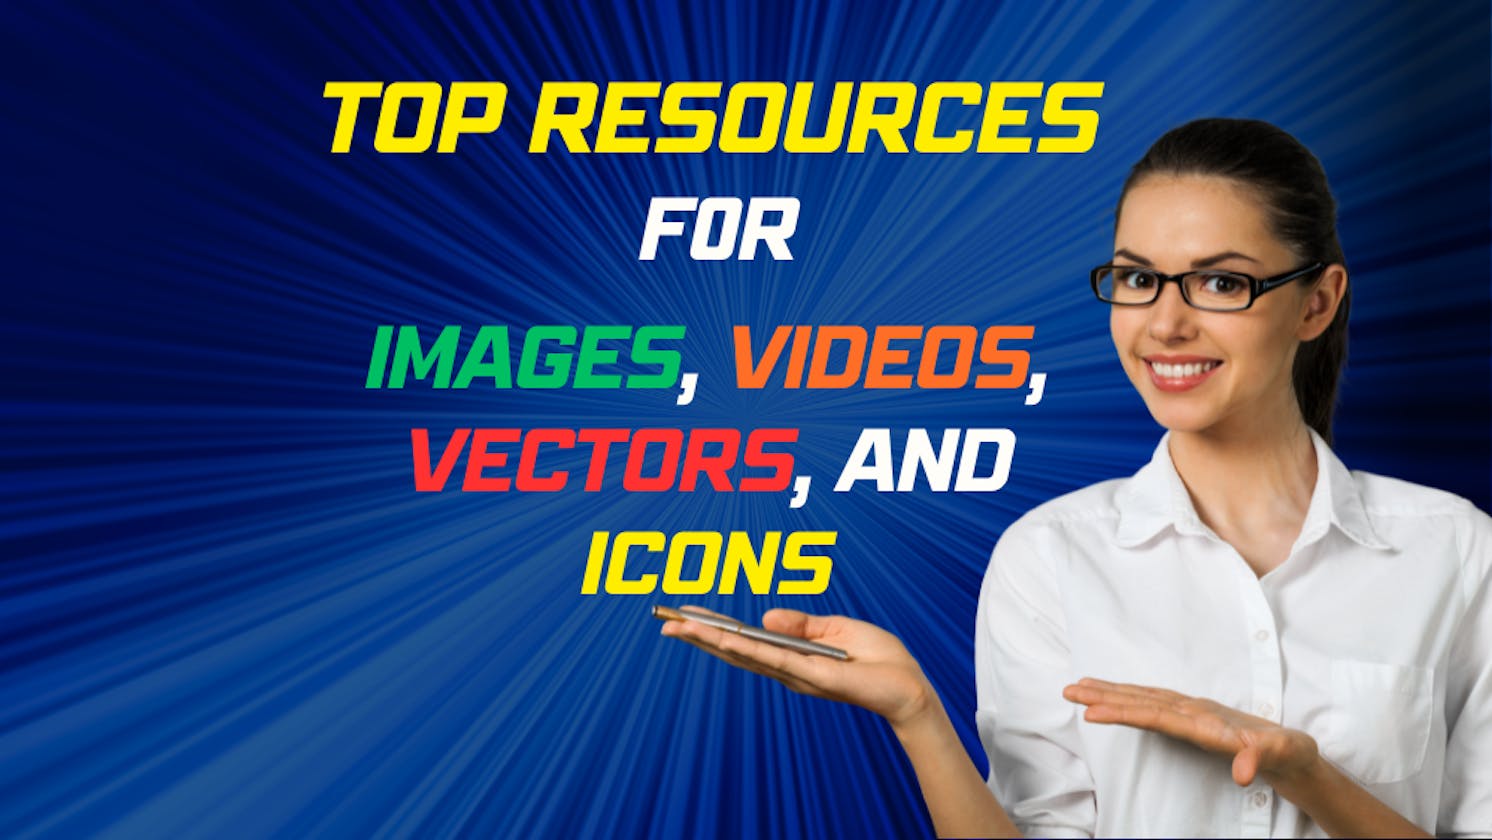 Top Resources for High-Quality Images, Vectors, and Icons